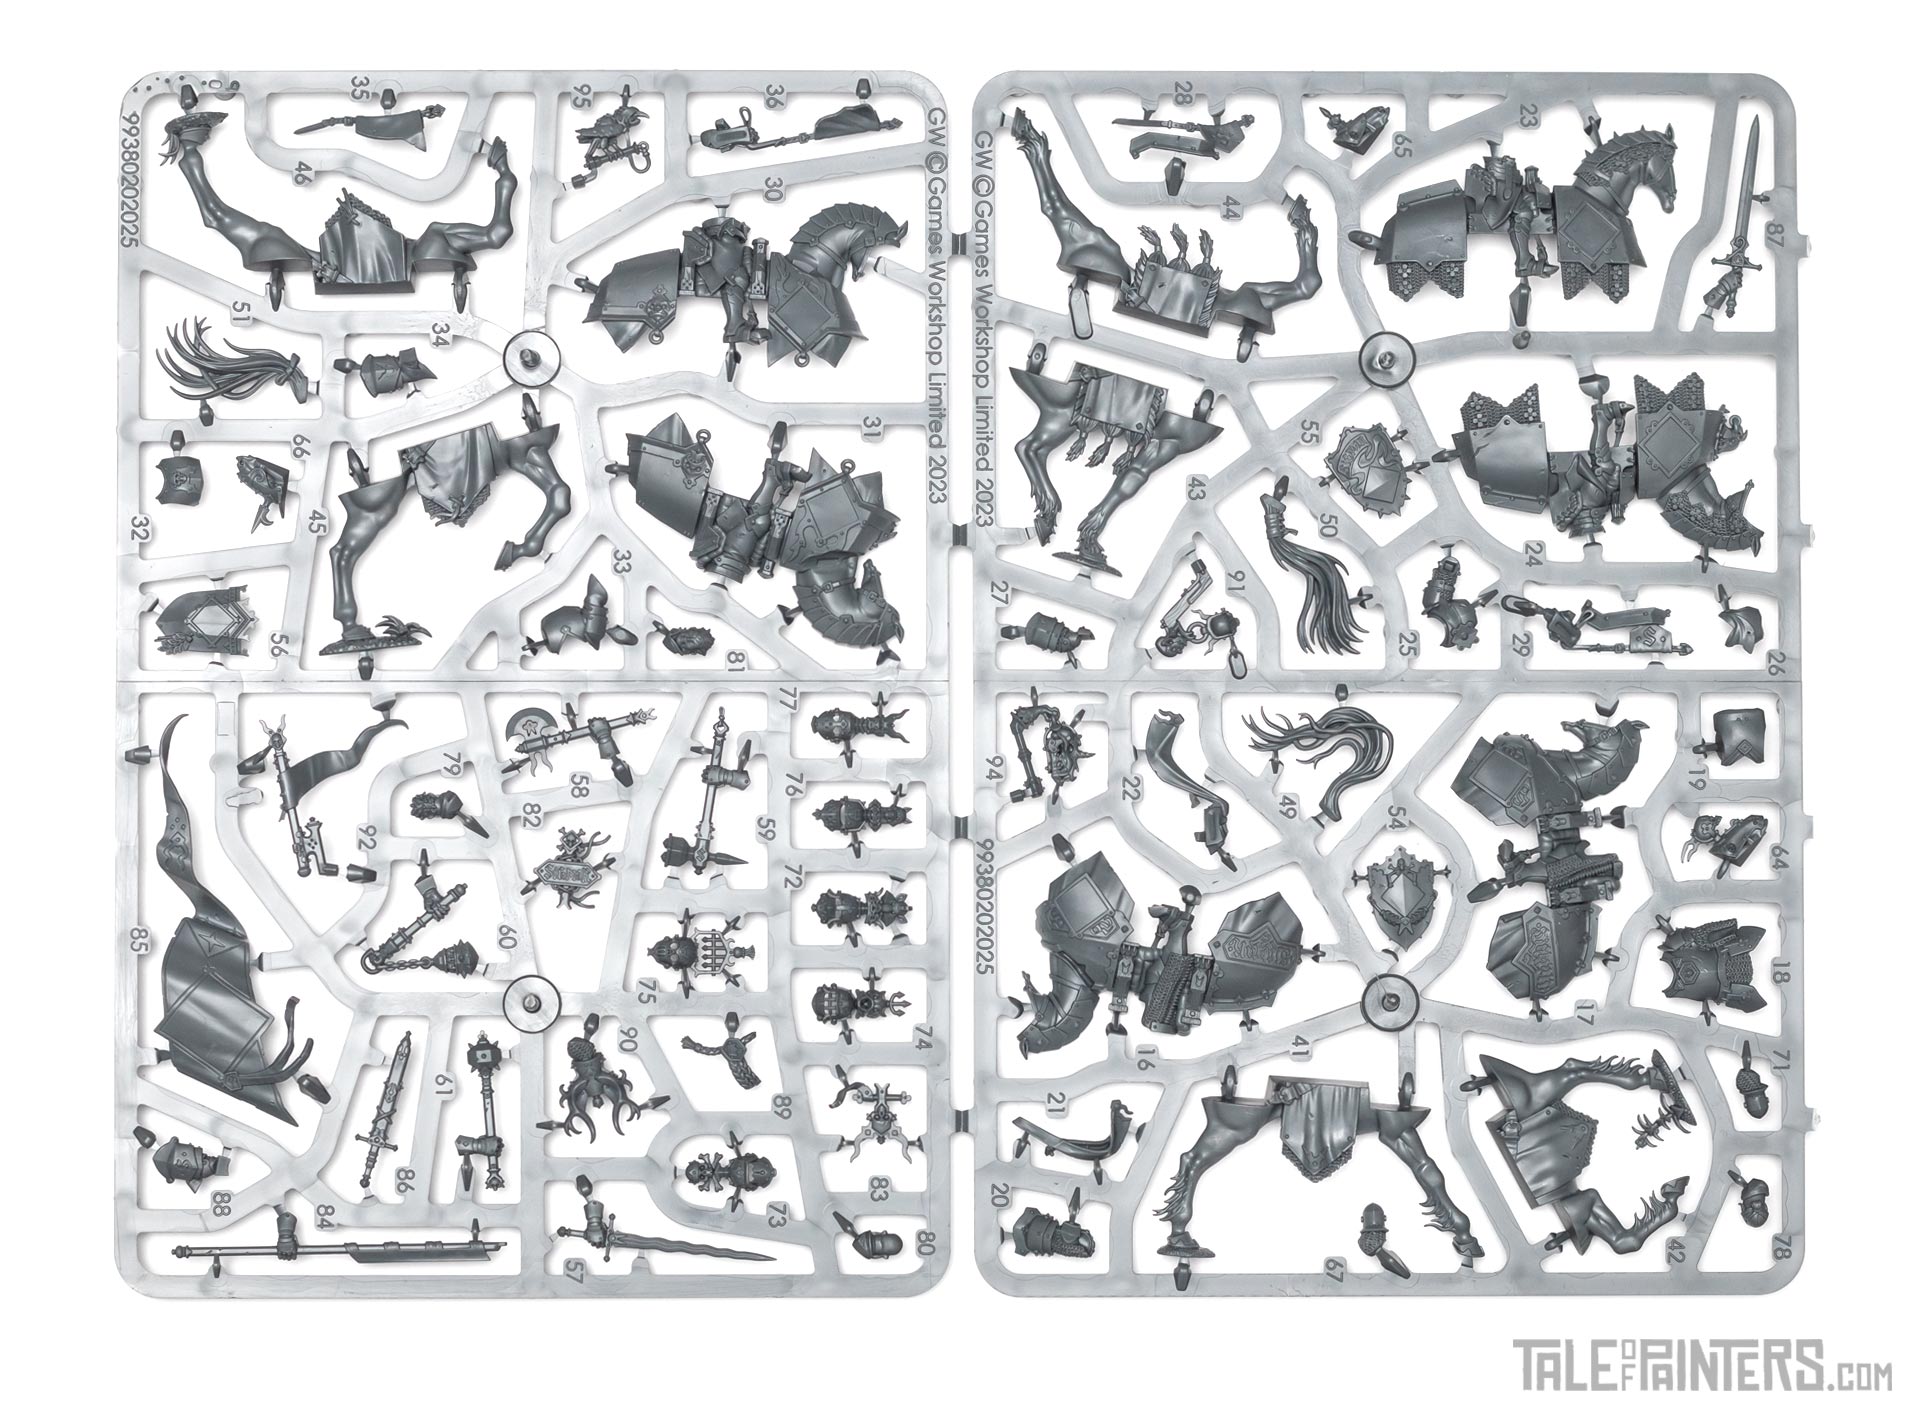 Freeguild Cavaliers sprue 1 and 2 from Stahly's Cities of Sigmar army set review